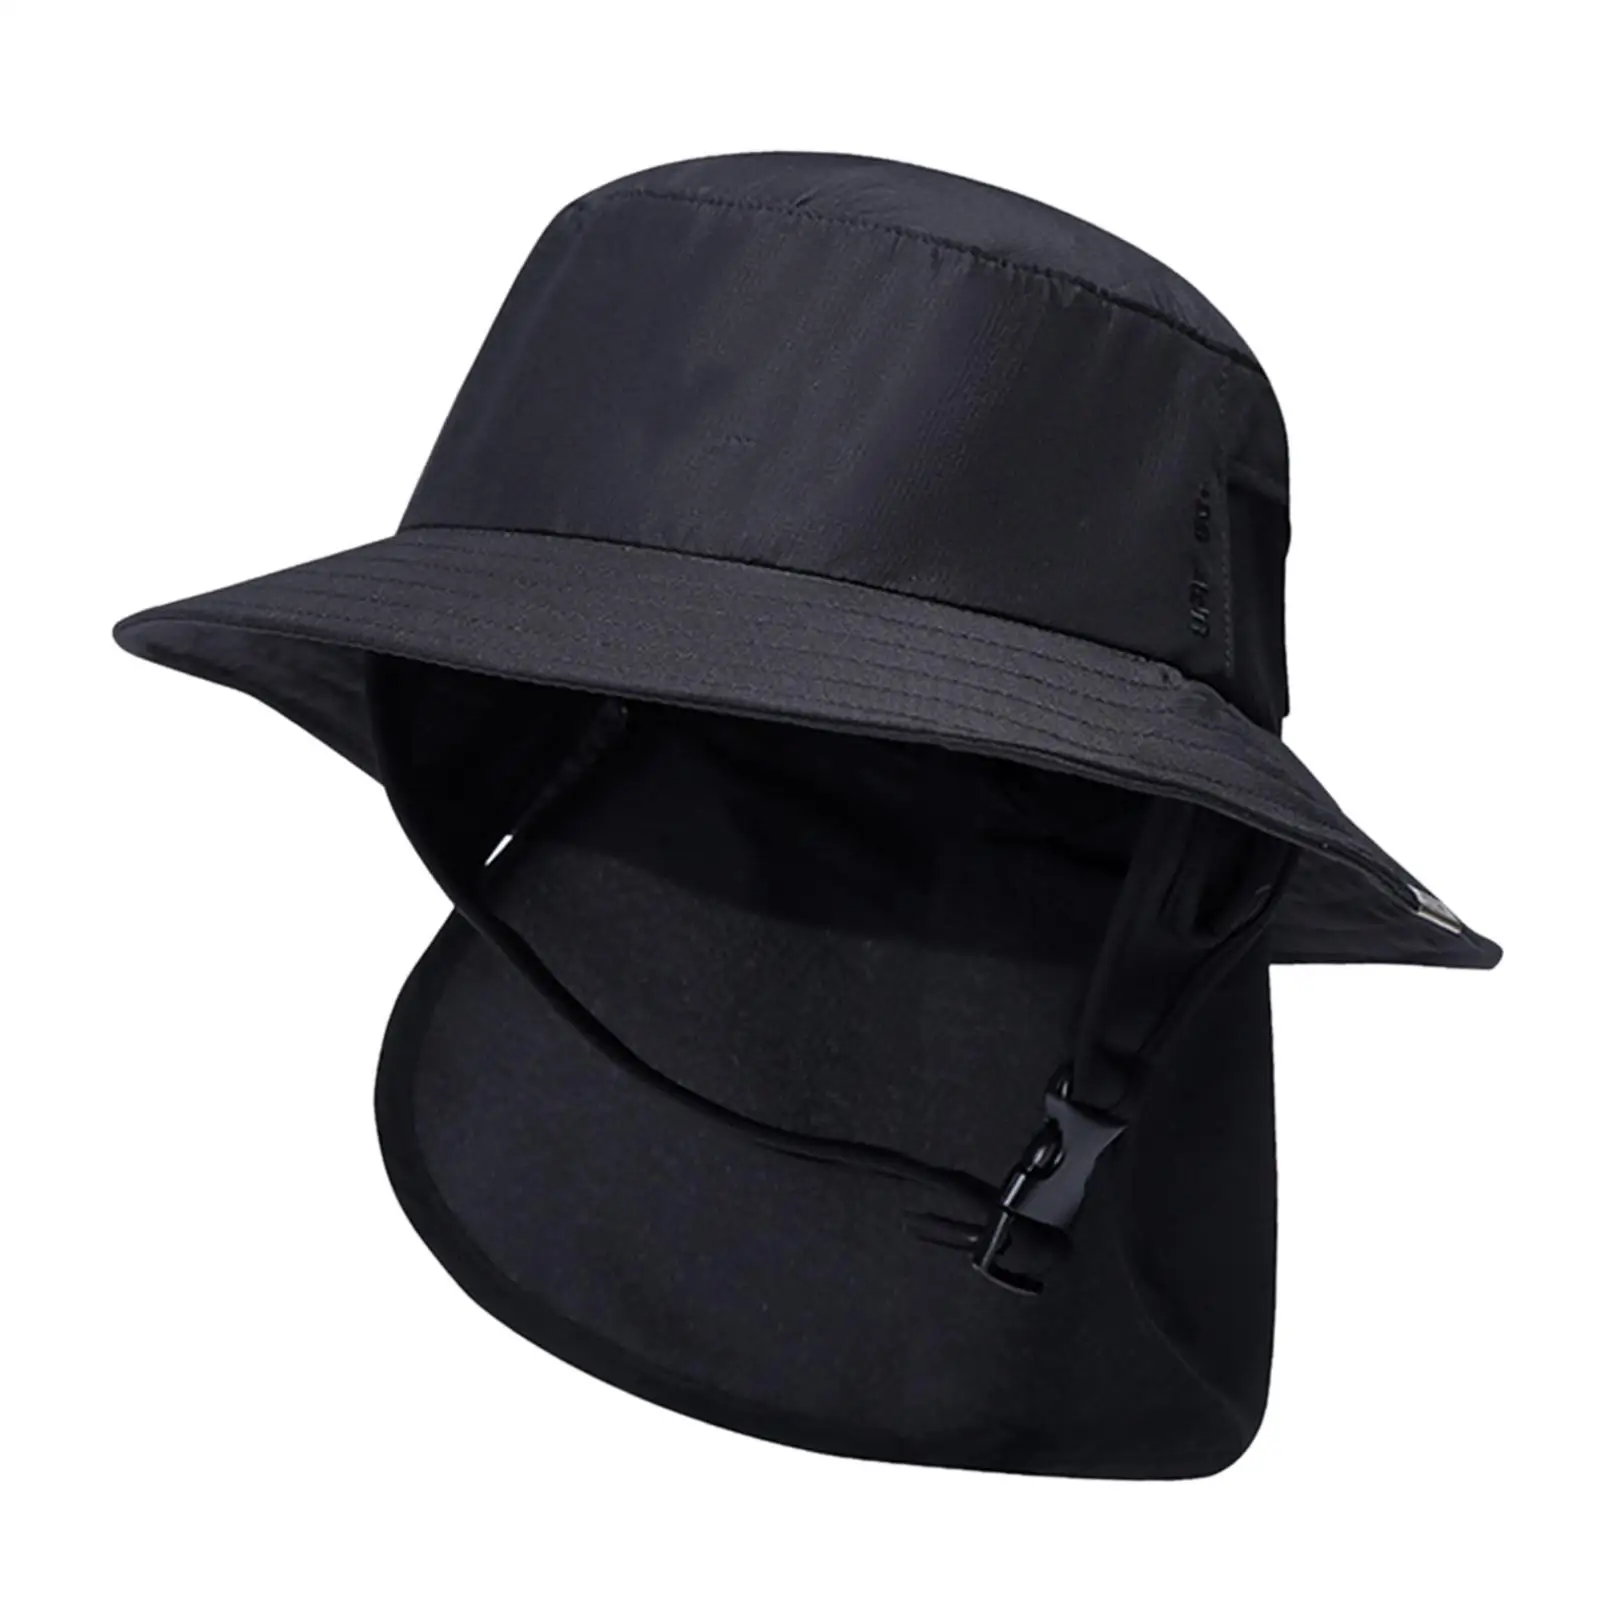 Surf Bucket Hat with Chin Straps Neck Flap Cover for Surfing Women Men